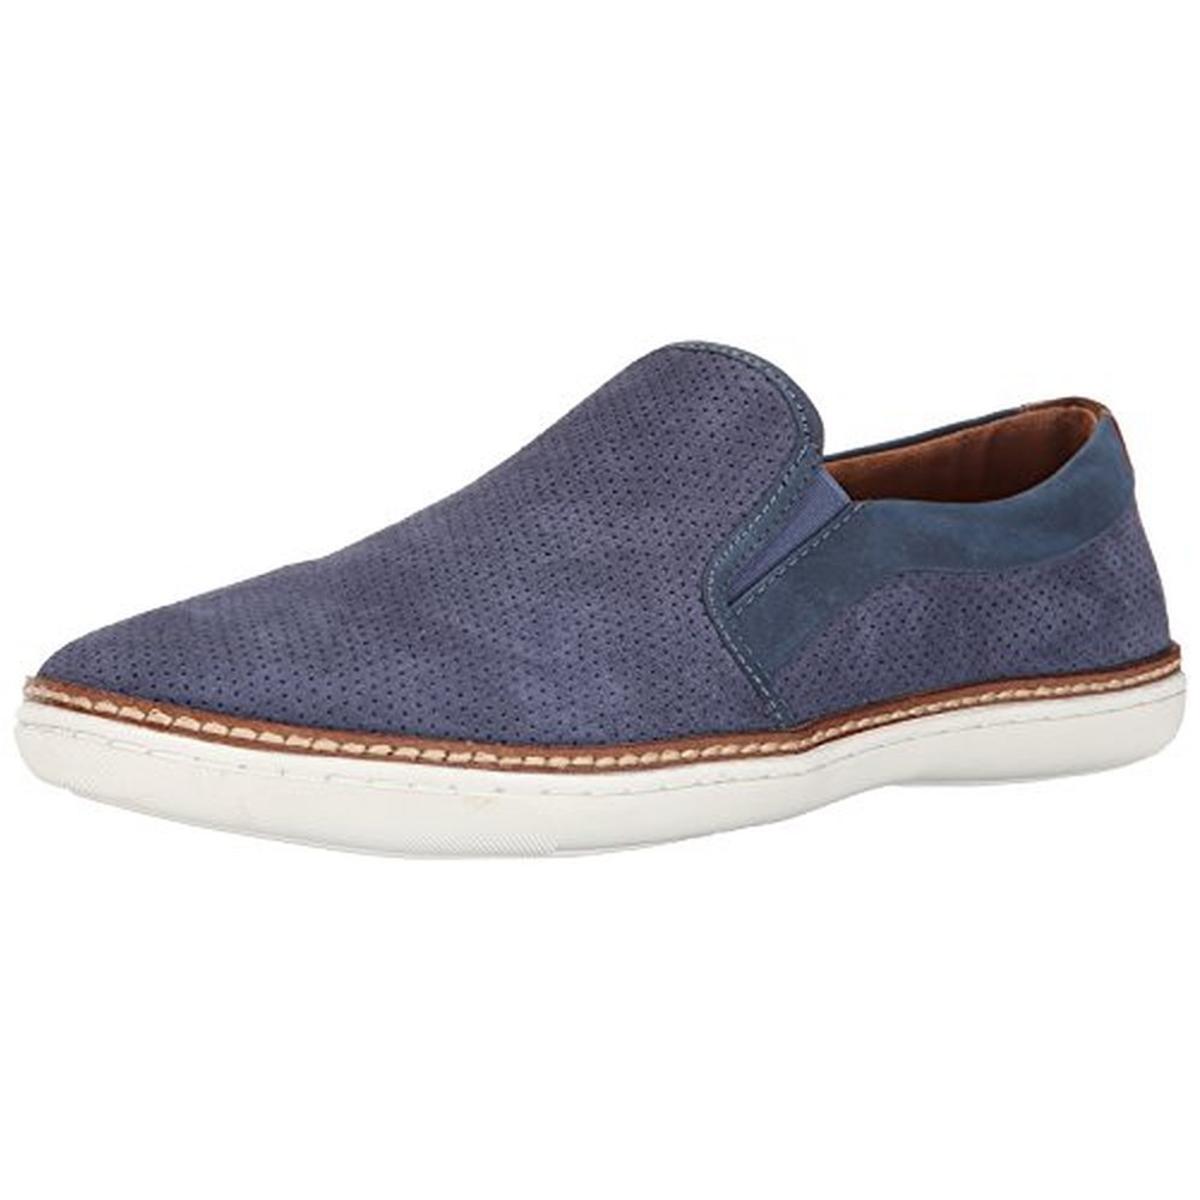 Steve Madden 5095 Mens Ferrow Suede Perforated Casual Loafers Shoes BHFO